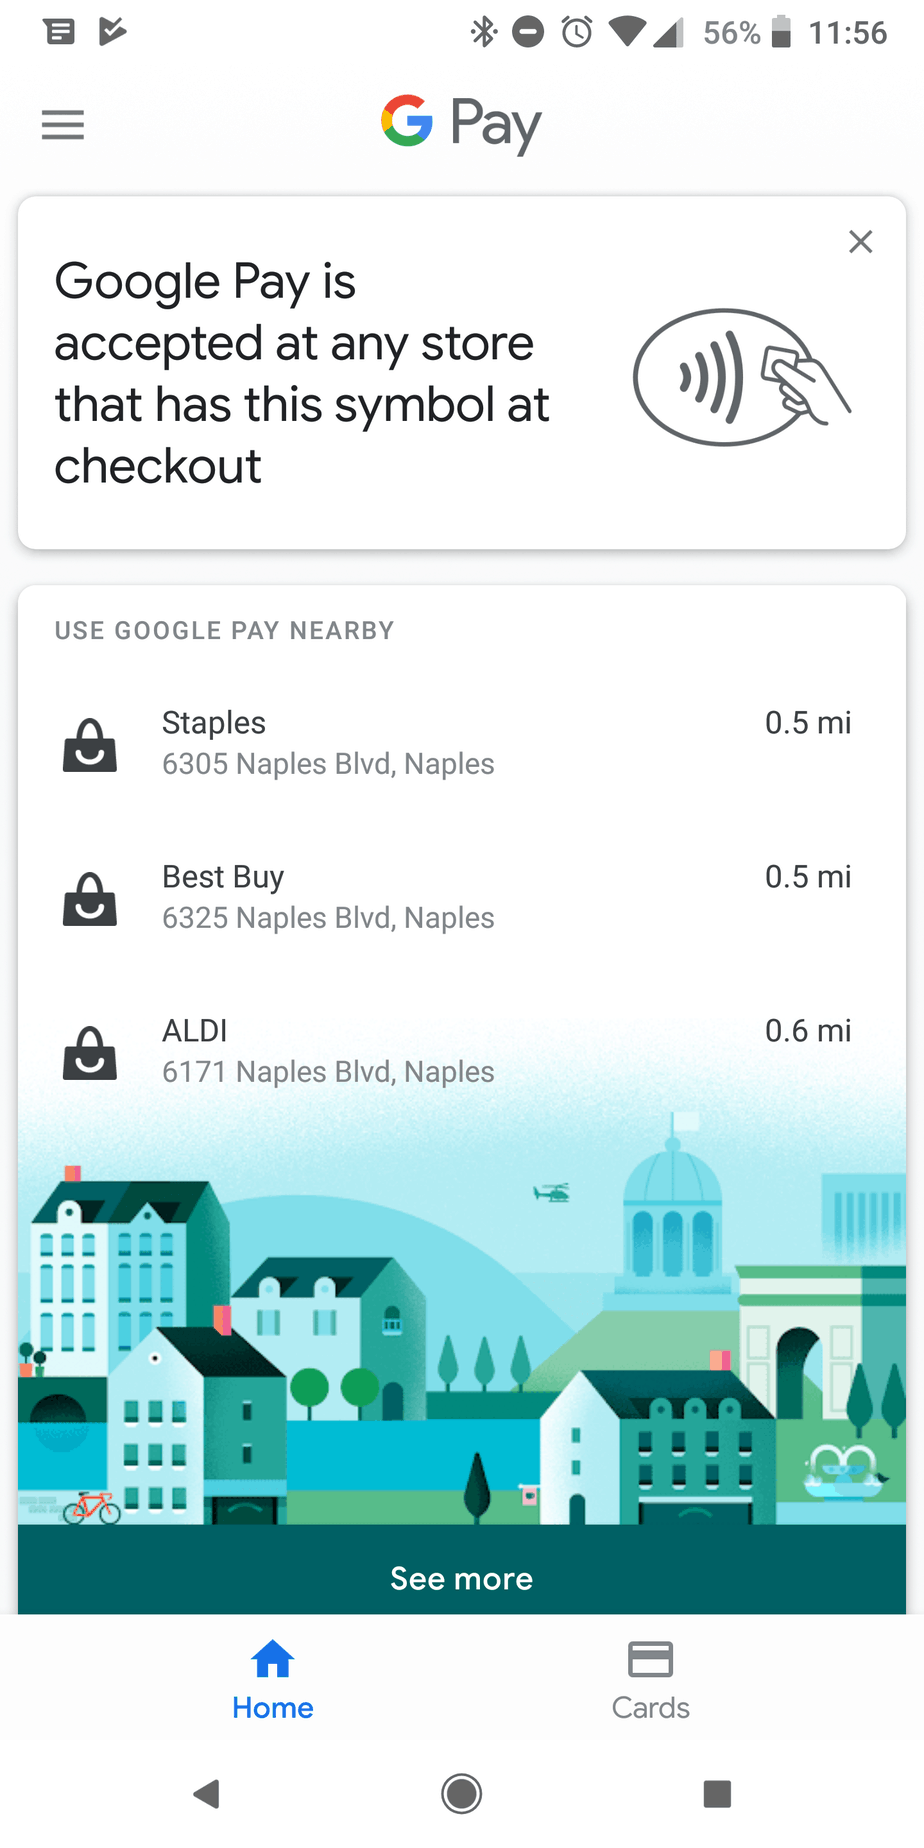 Google Pay Nearby Location Tool